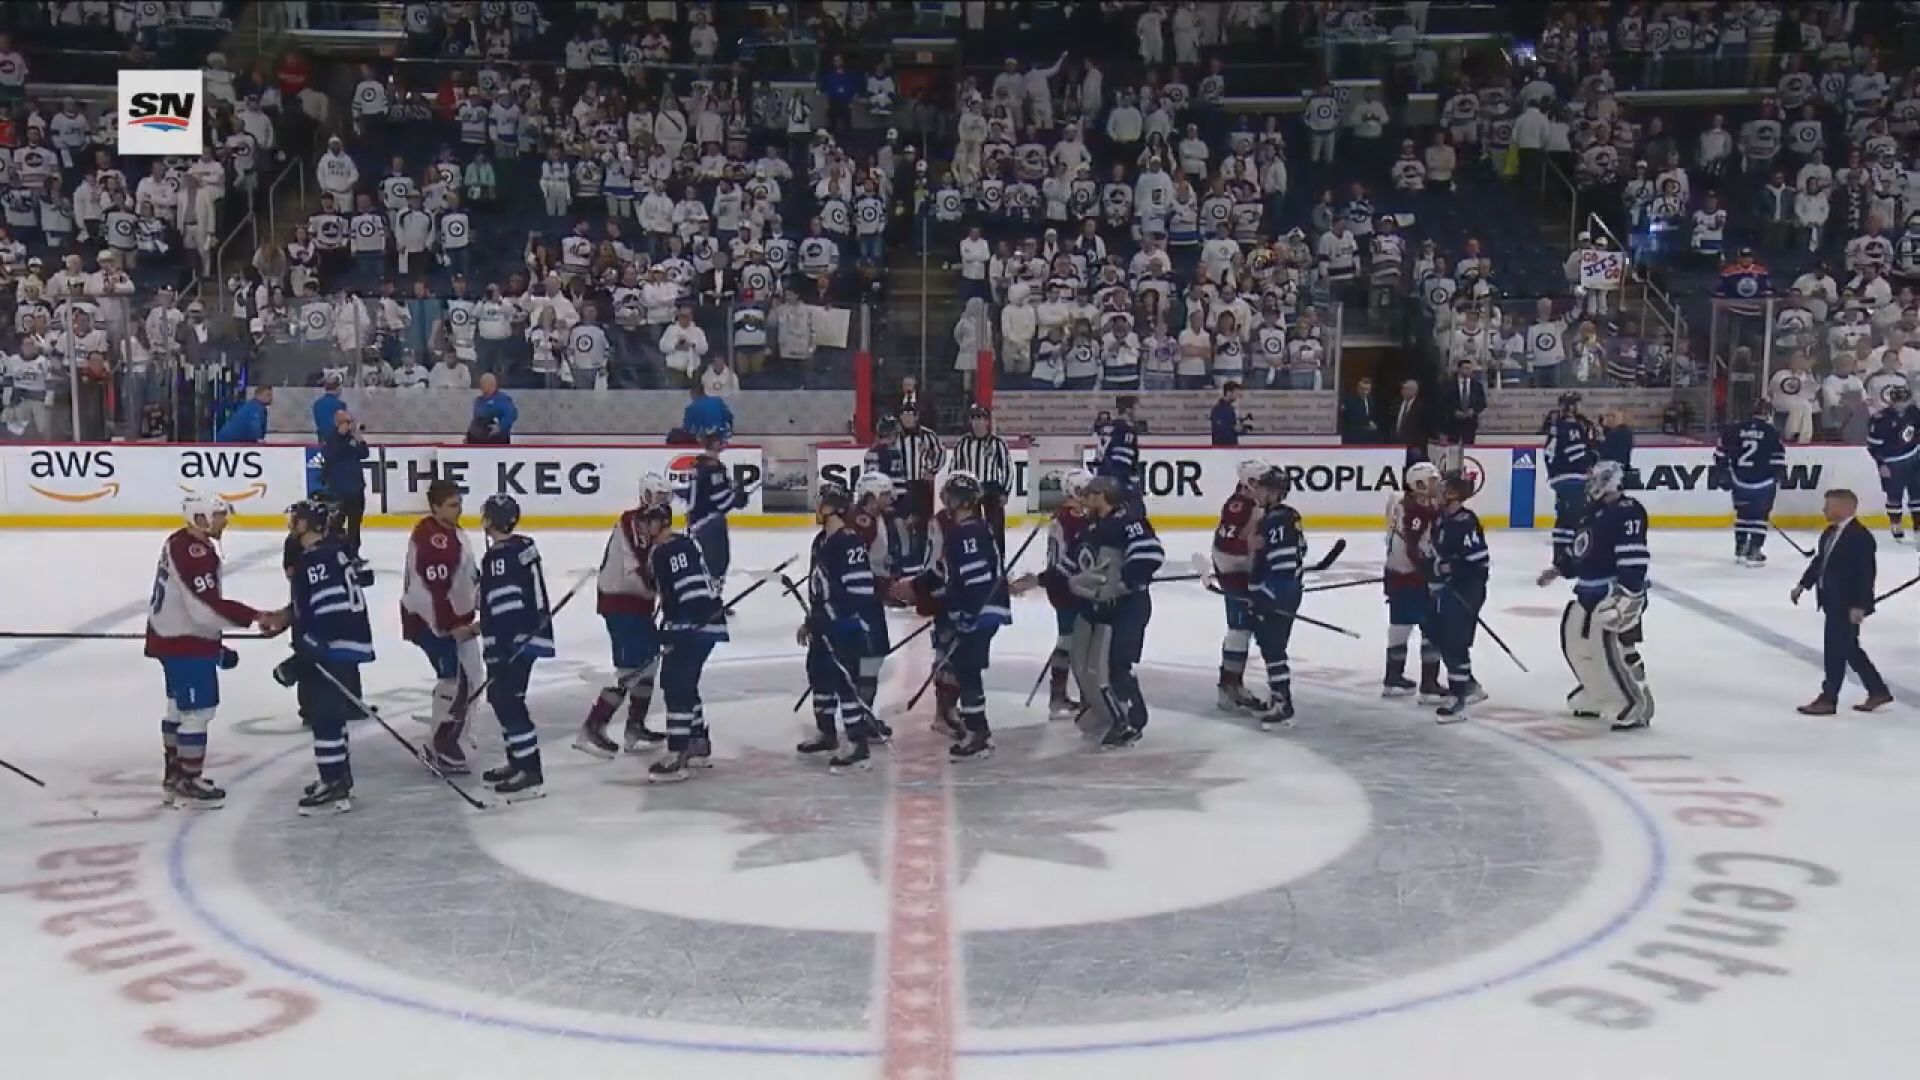 'I hope it stings' Winnipeg fans in disbelief after another early playoff exit.